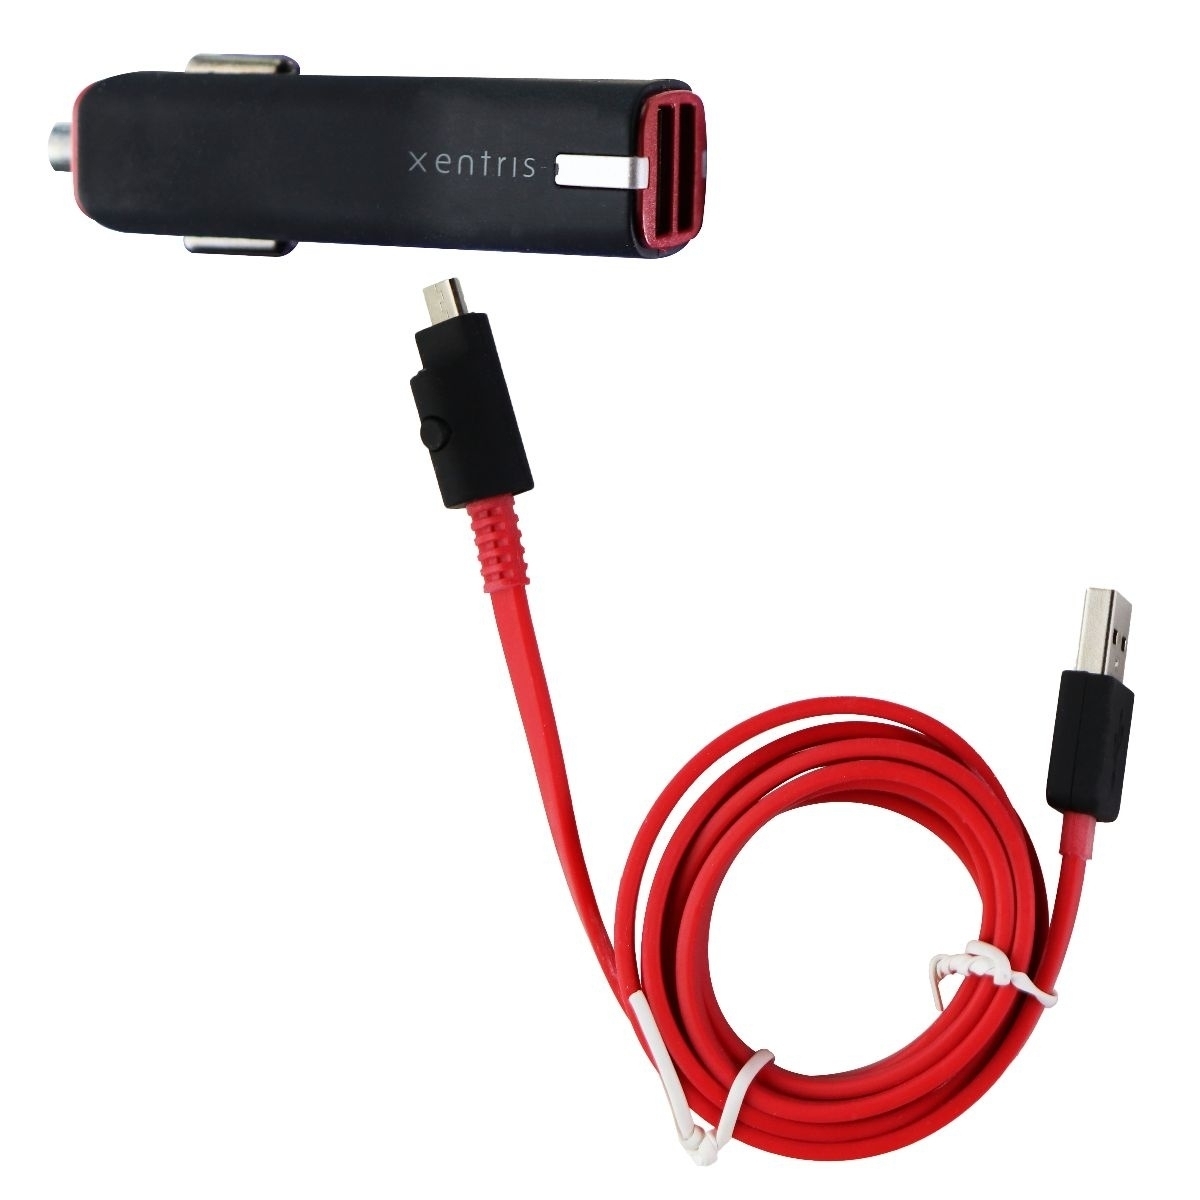 Xentrix (3.4A) Dual USB Car Adapter + 4-Ft Micro-USB LED Cable - Black/Red